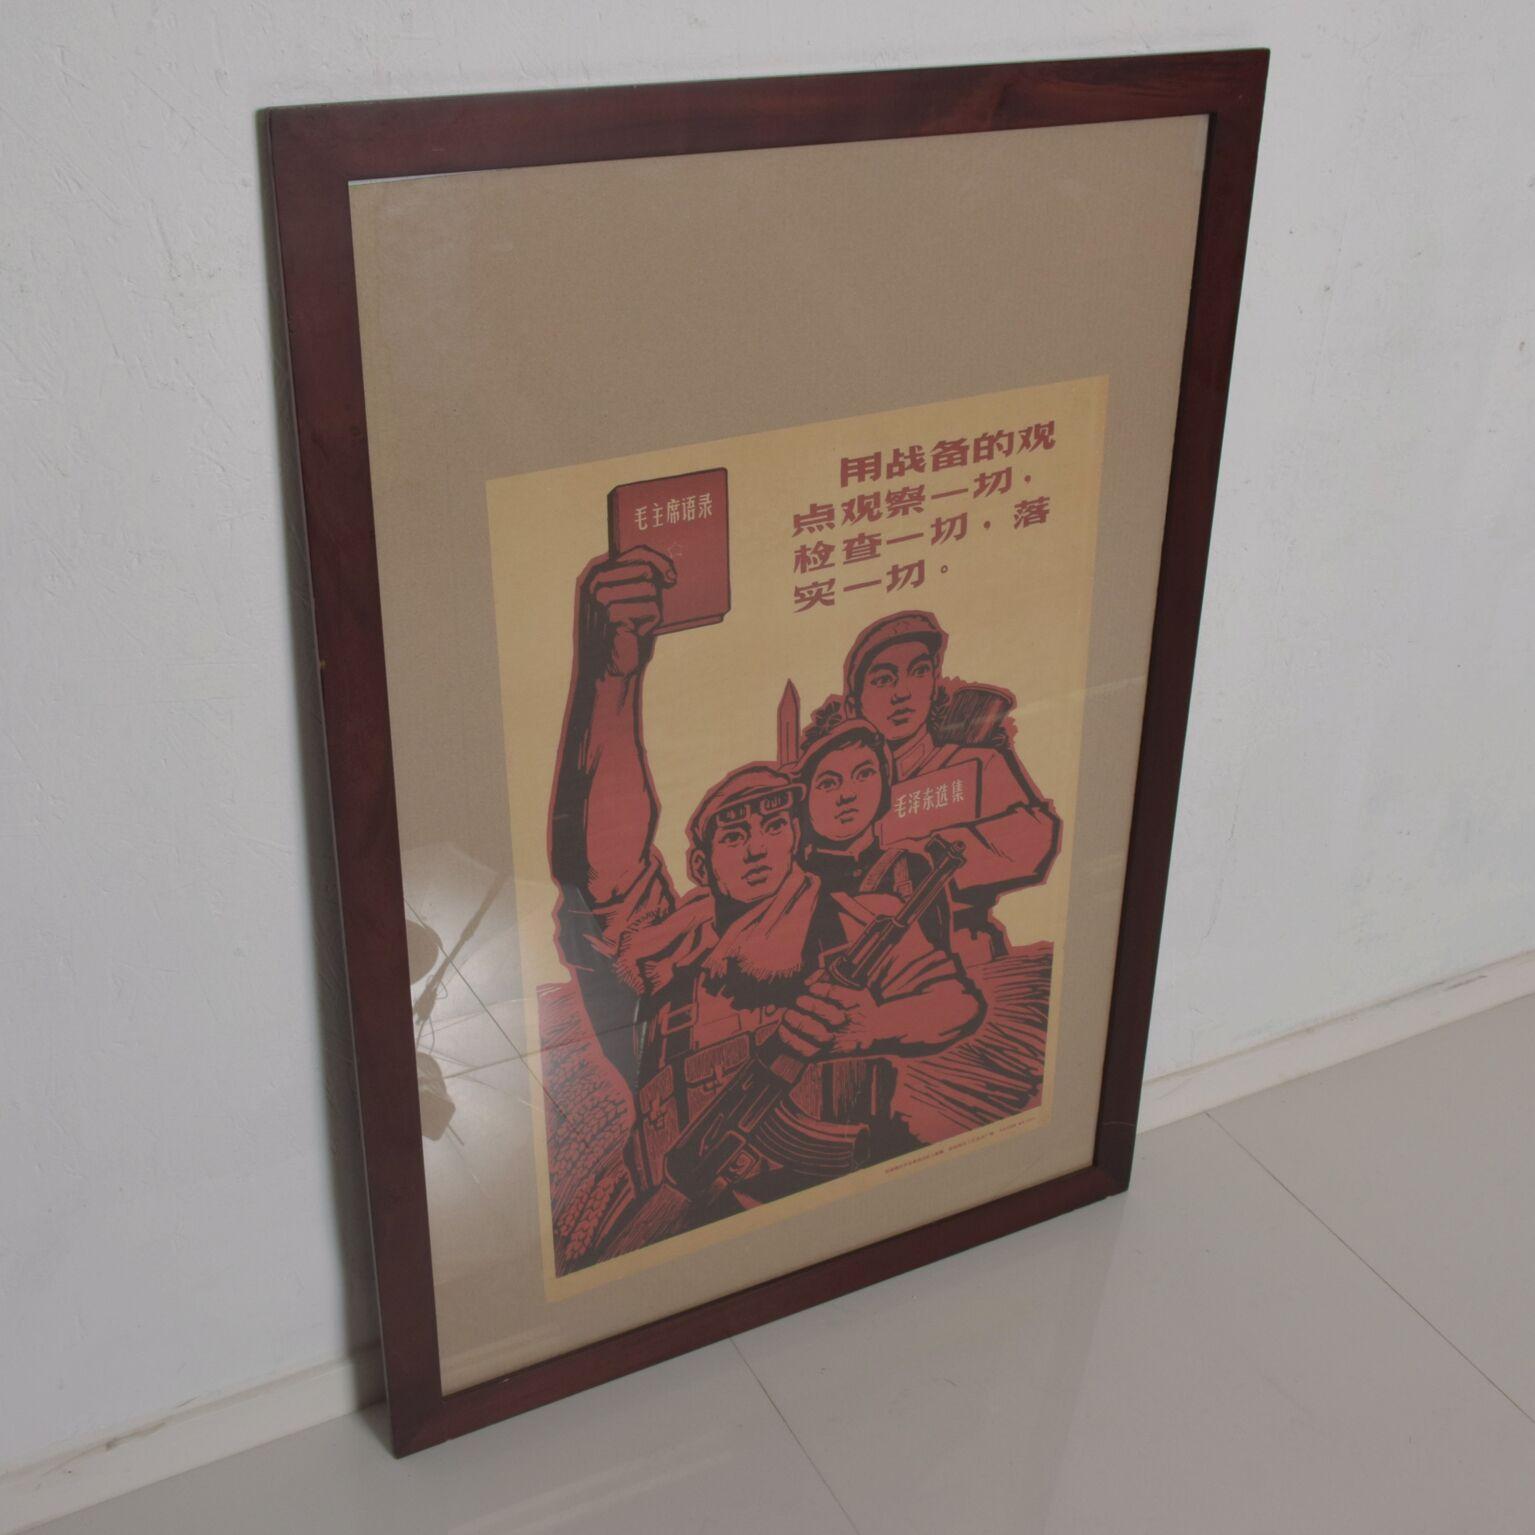 Paper Vintage Rare Chinese Red Communist Party Propaganda Art Poster Lithograph